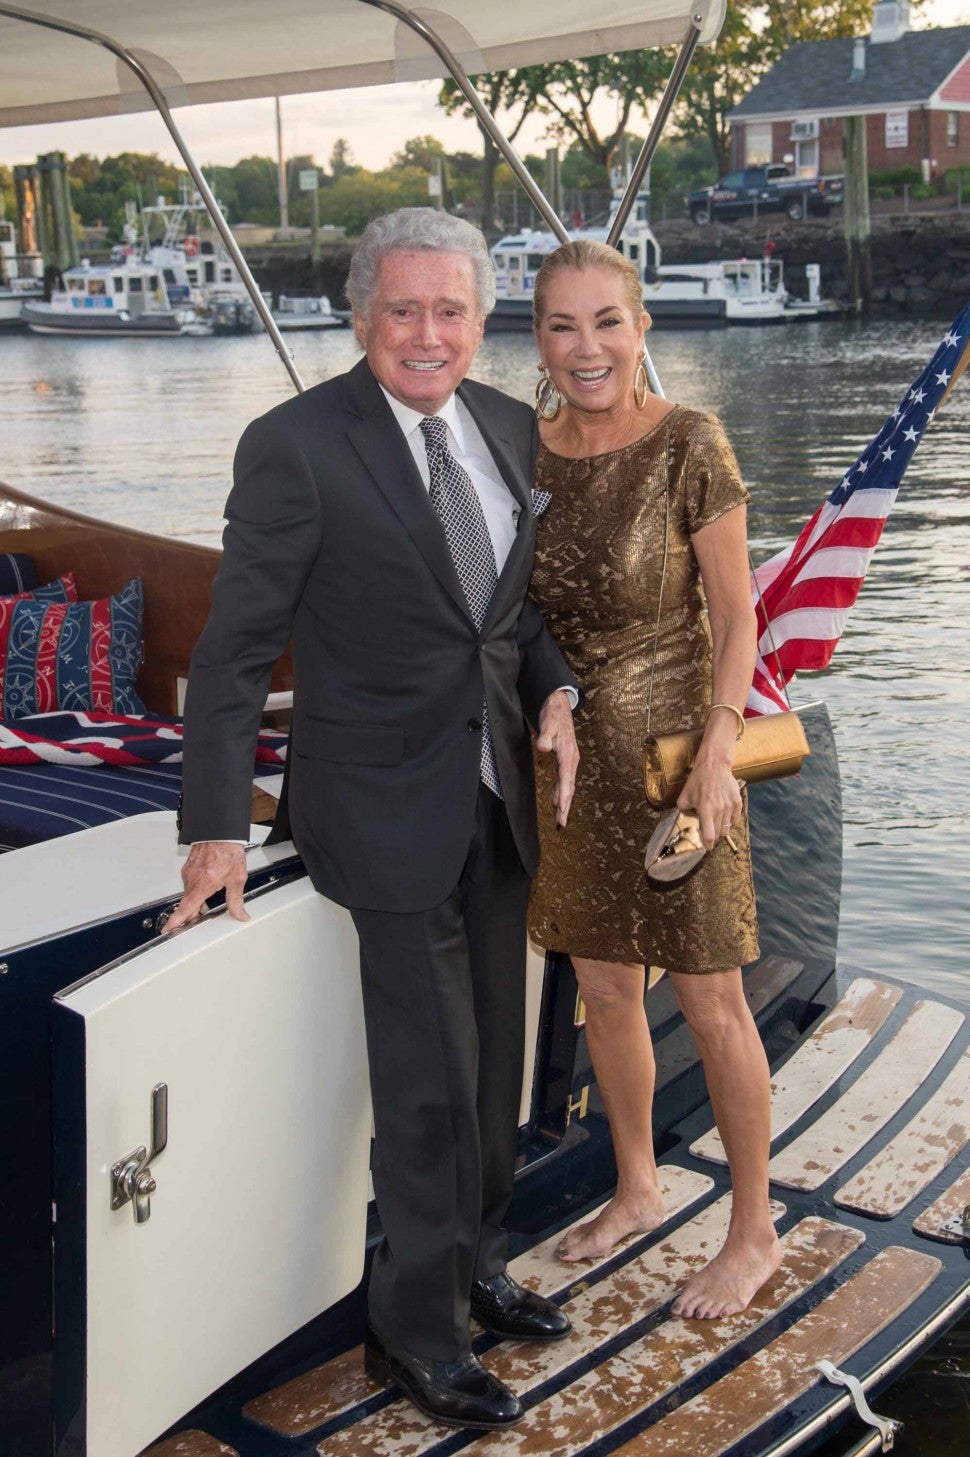 egis Philbin (L) and Kathie Lee Gifford attend the Greenwich International Film Festival's Changemaker Gala at L'Escale Restaurant on June 6, 2015 in Greenwich, Connecticut. 